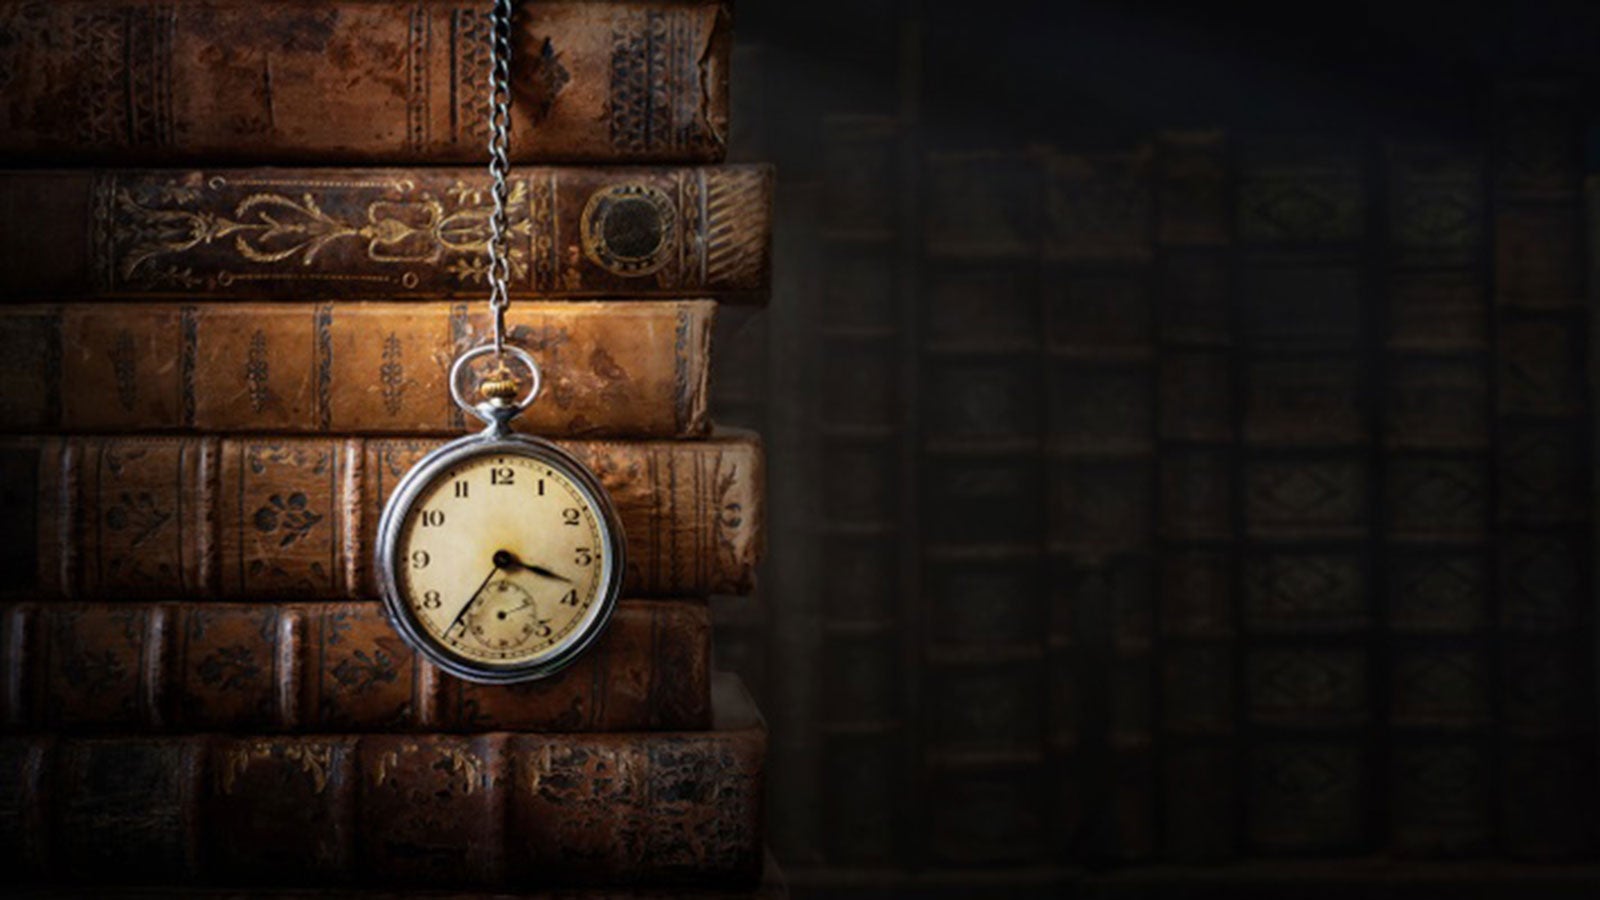 Stack of old books with a pocket watch draped over them